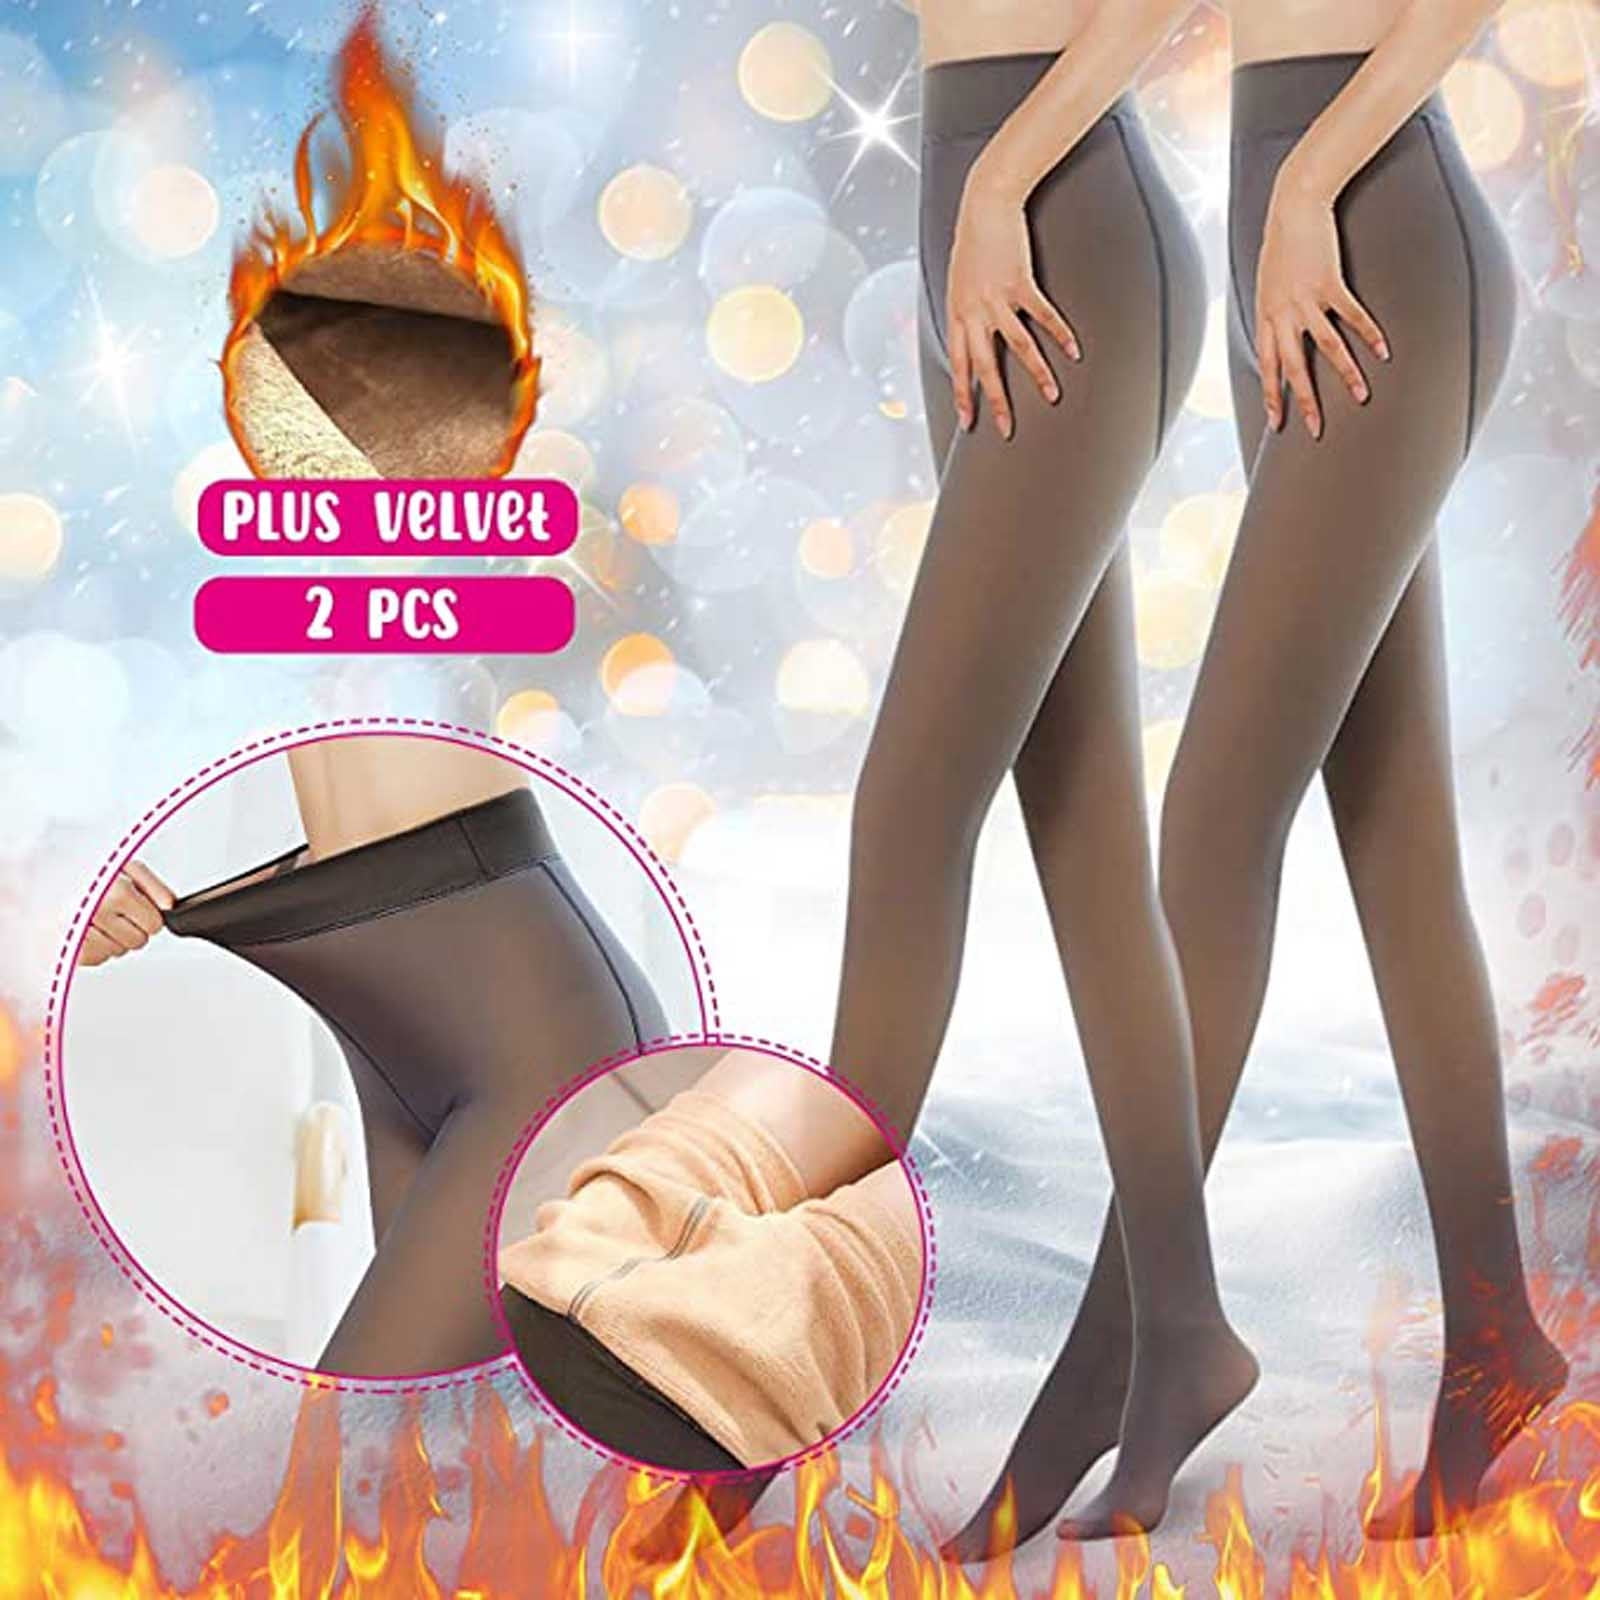 Chiccall Fleece Lined Tights for Women, High Waist Fake Translucent  Leggings Thermal Warm Sheertex Tights Winter Slim Stretchy Pantyhose,on  Clearance